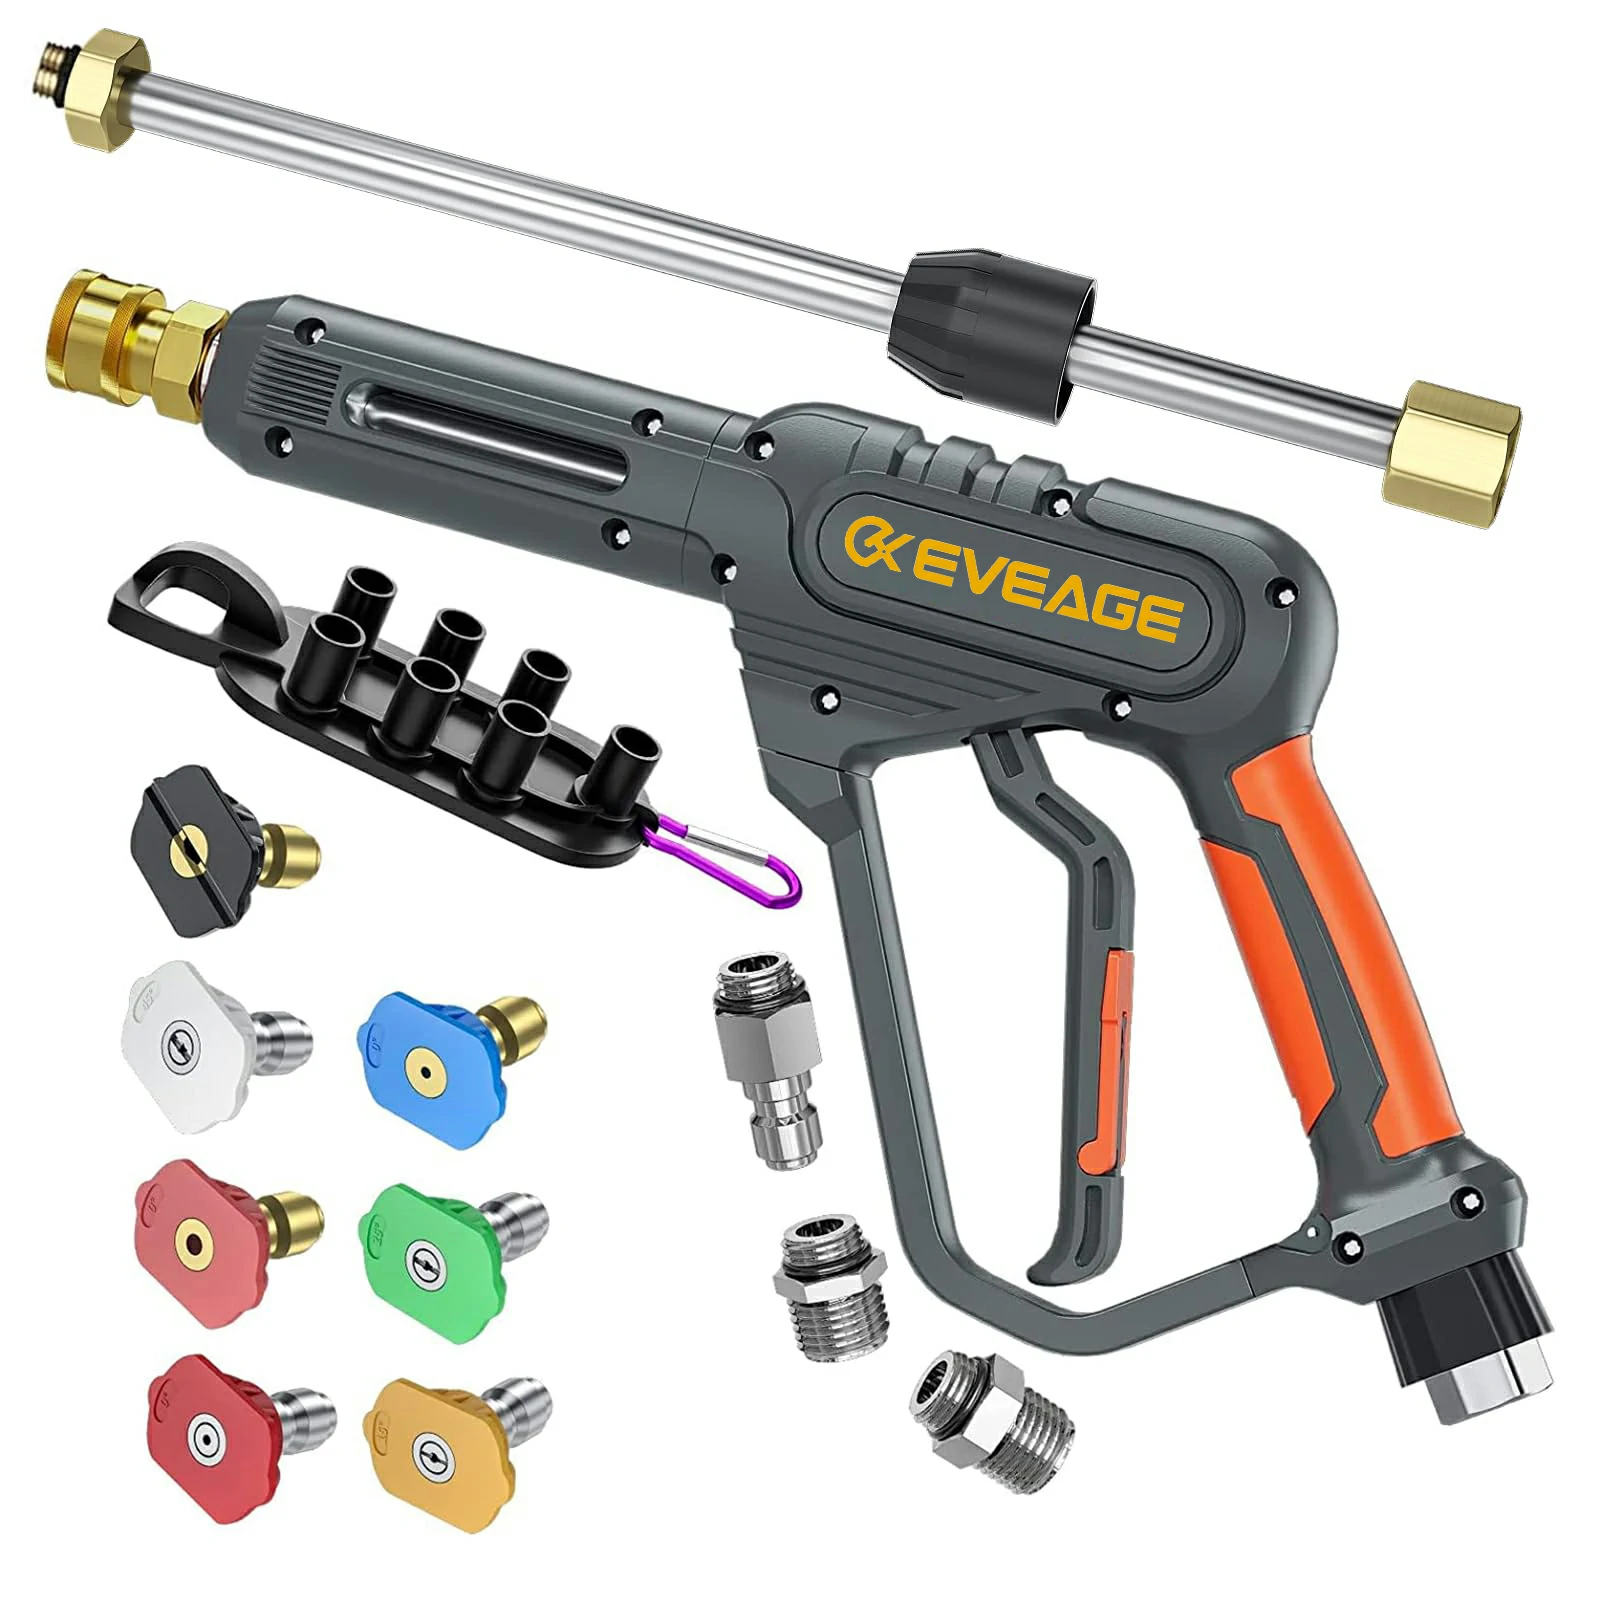 EVEAGE High Pressure Washer Gun with Swivel Ends